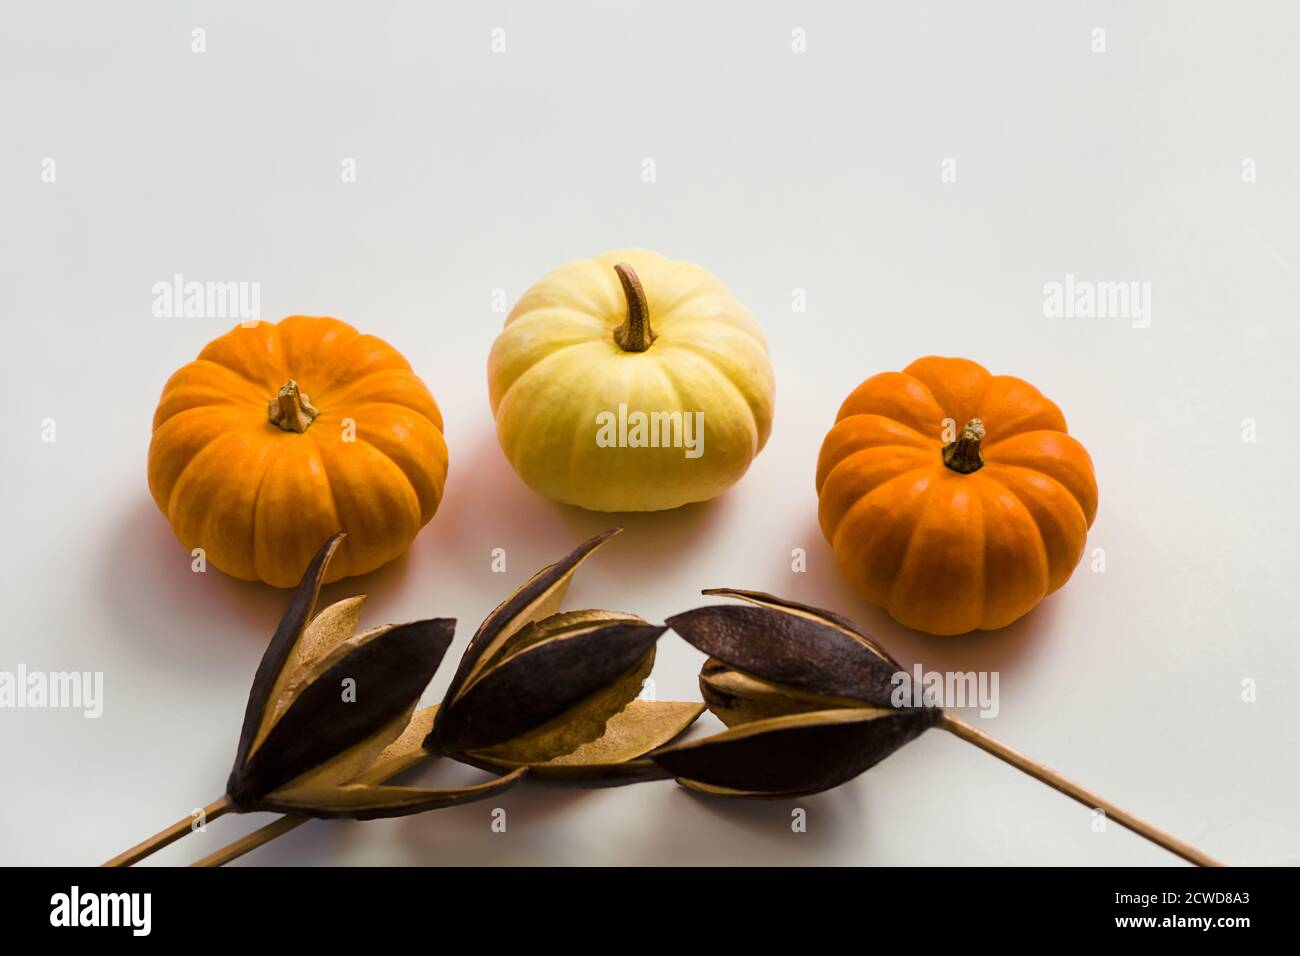 Three pumpkins and three dried brown wood flowers on white background Stock Photo